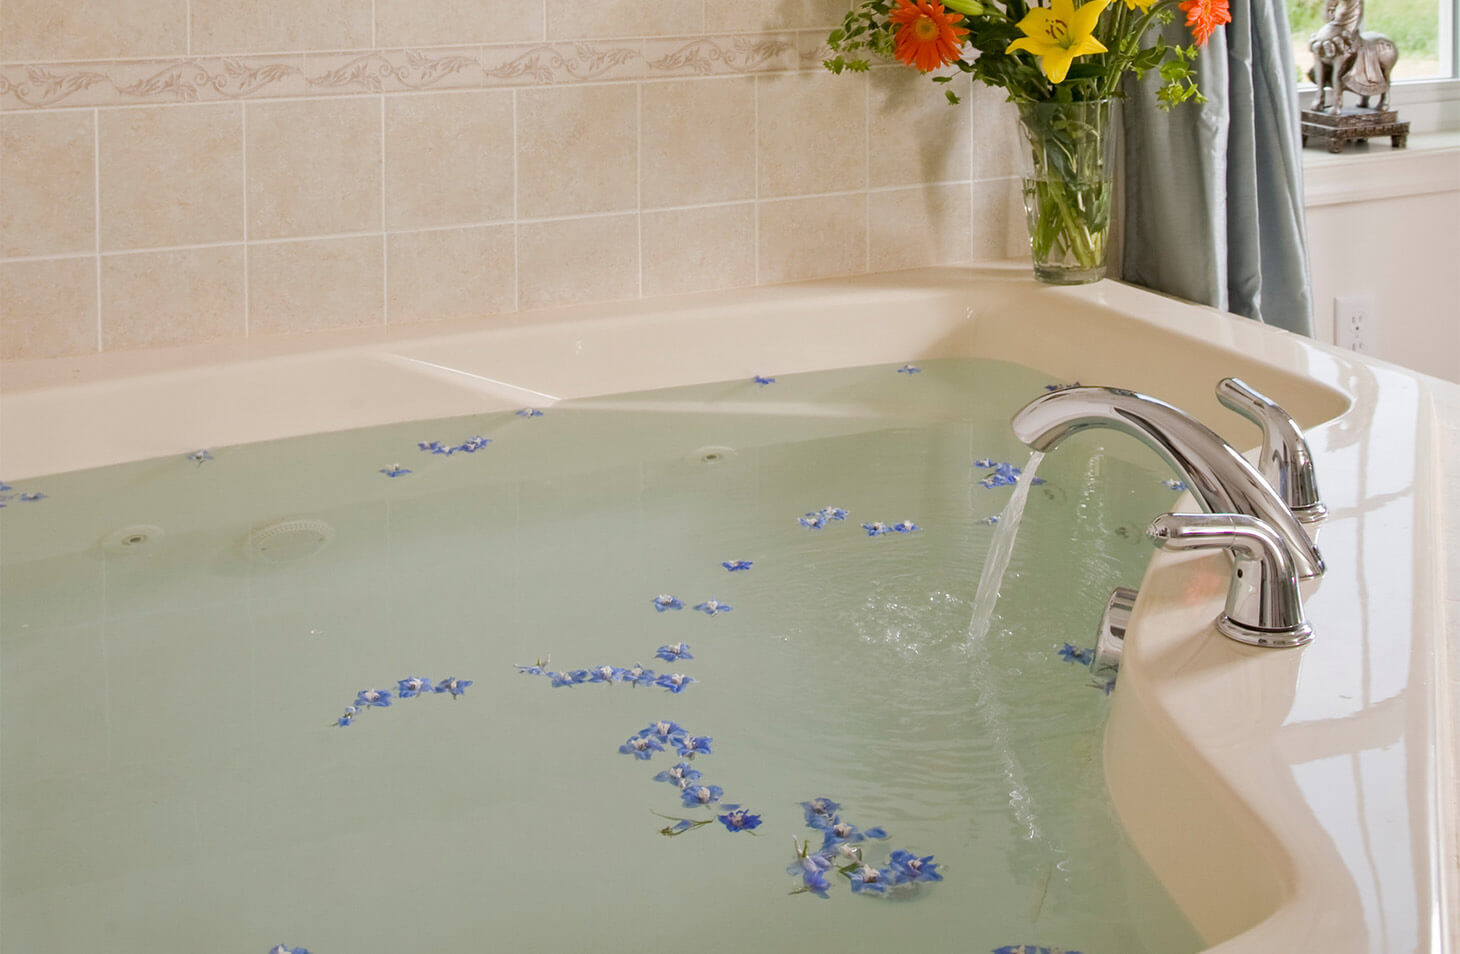 Close-up of jetted spa tub with flower petals on the surface